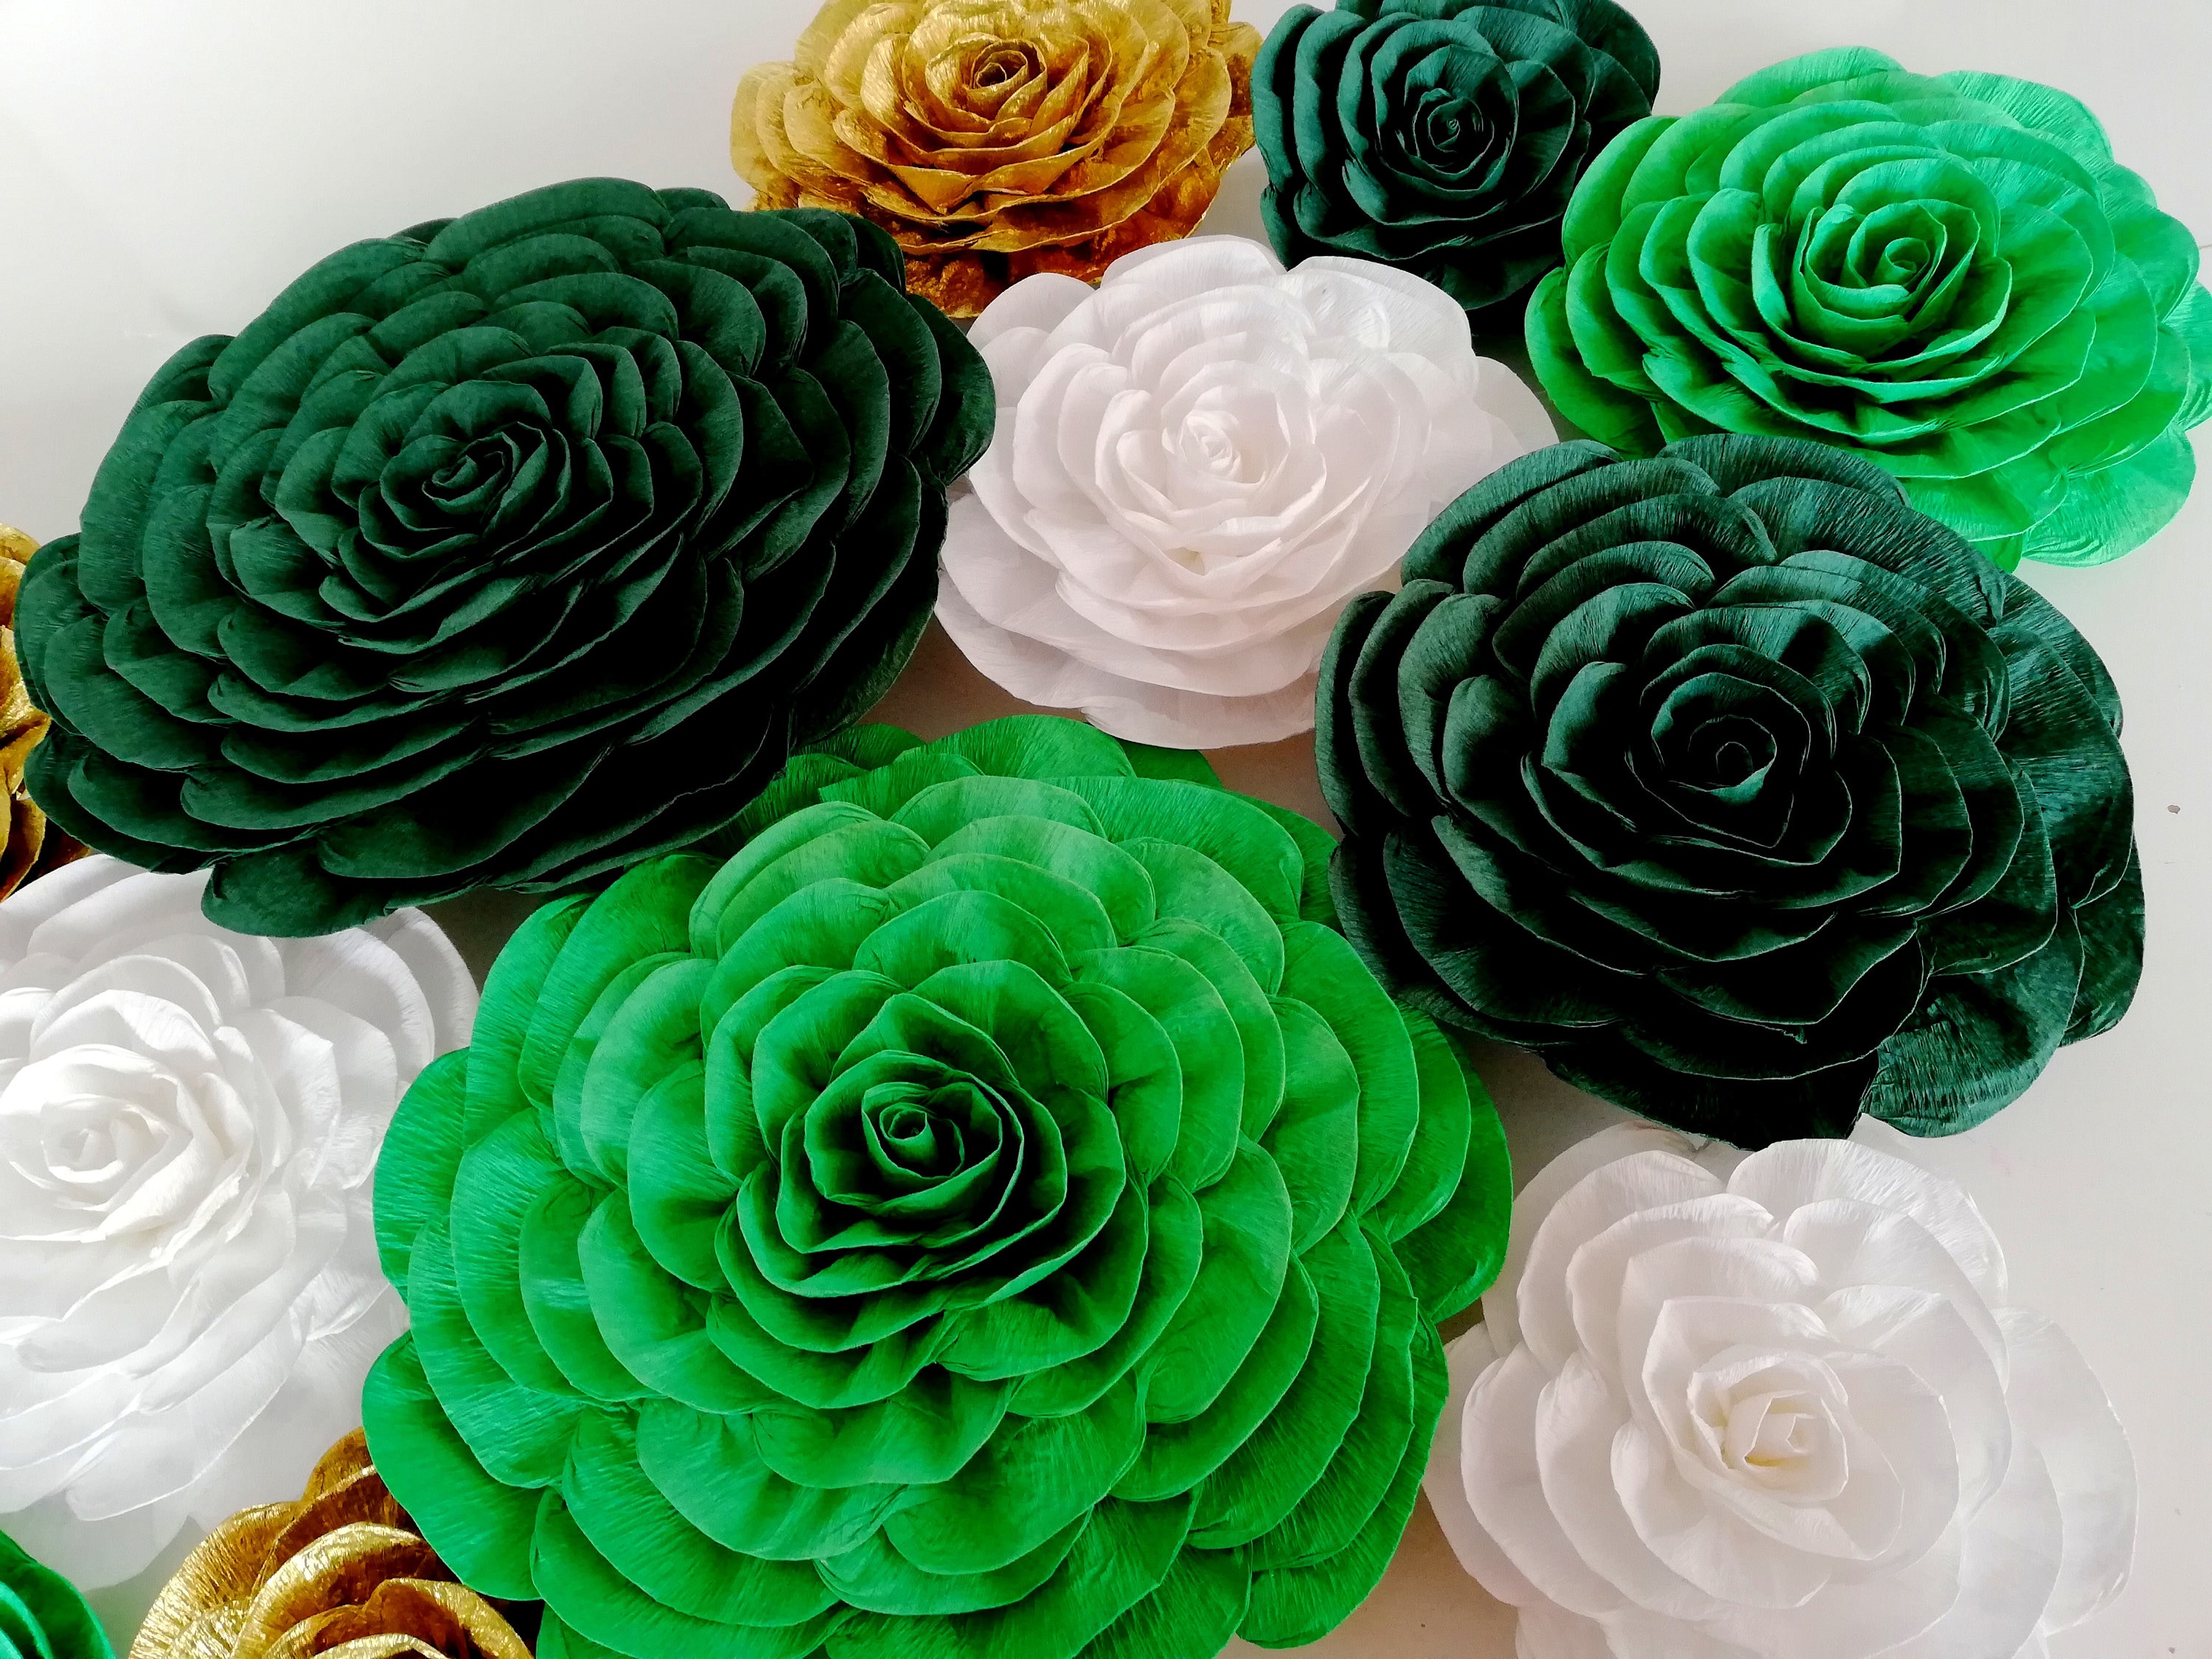 Luxury Set of Giant Paper Flowers, Paper Flower Backdrop, Over the Bed Wall  Decor, Engagement Party Decorations, White Green Paper Flowers 